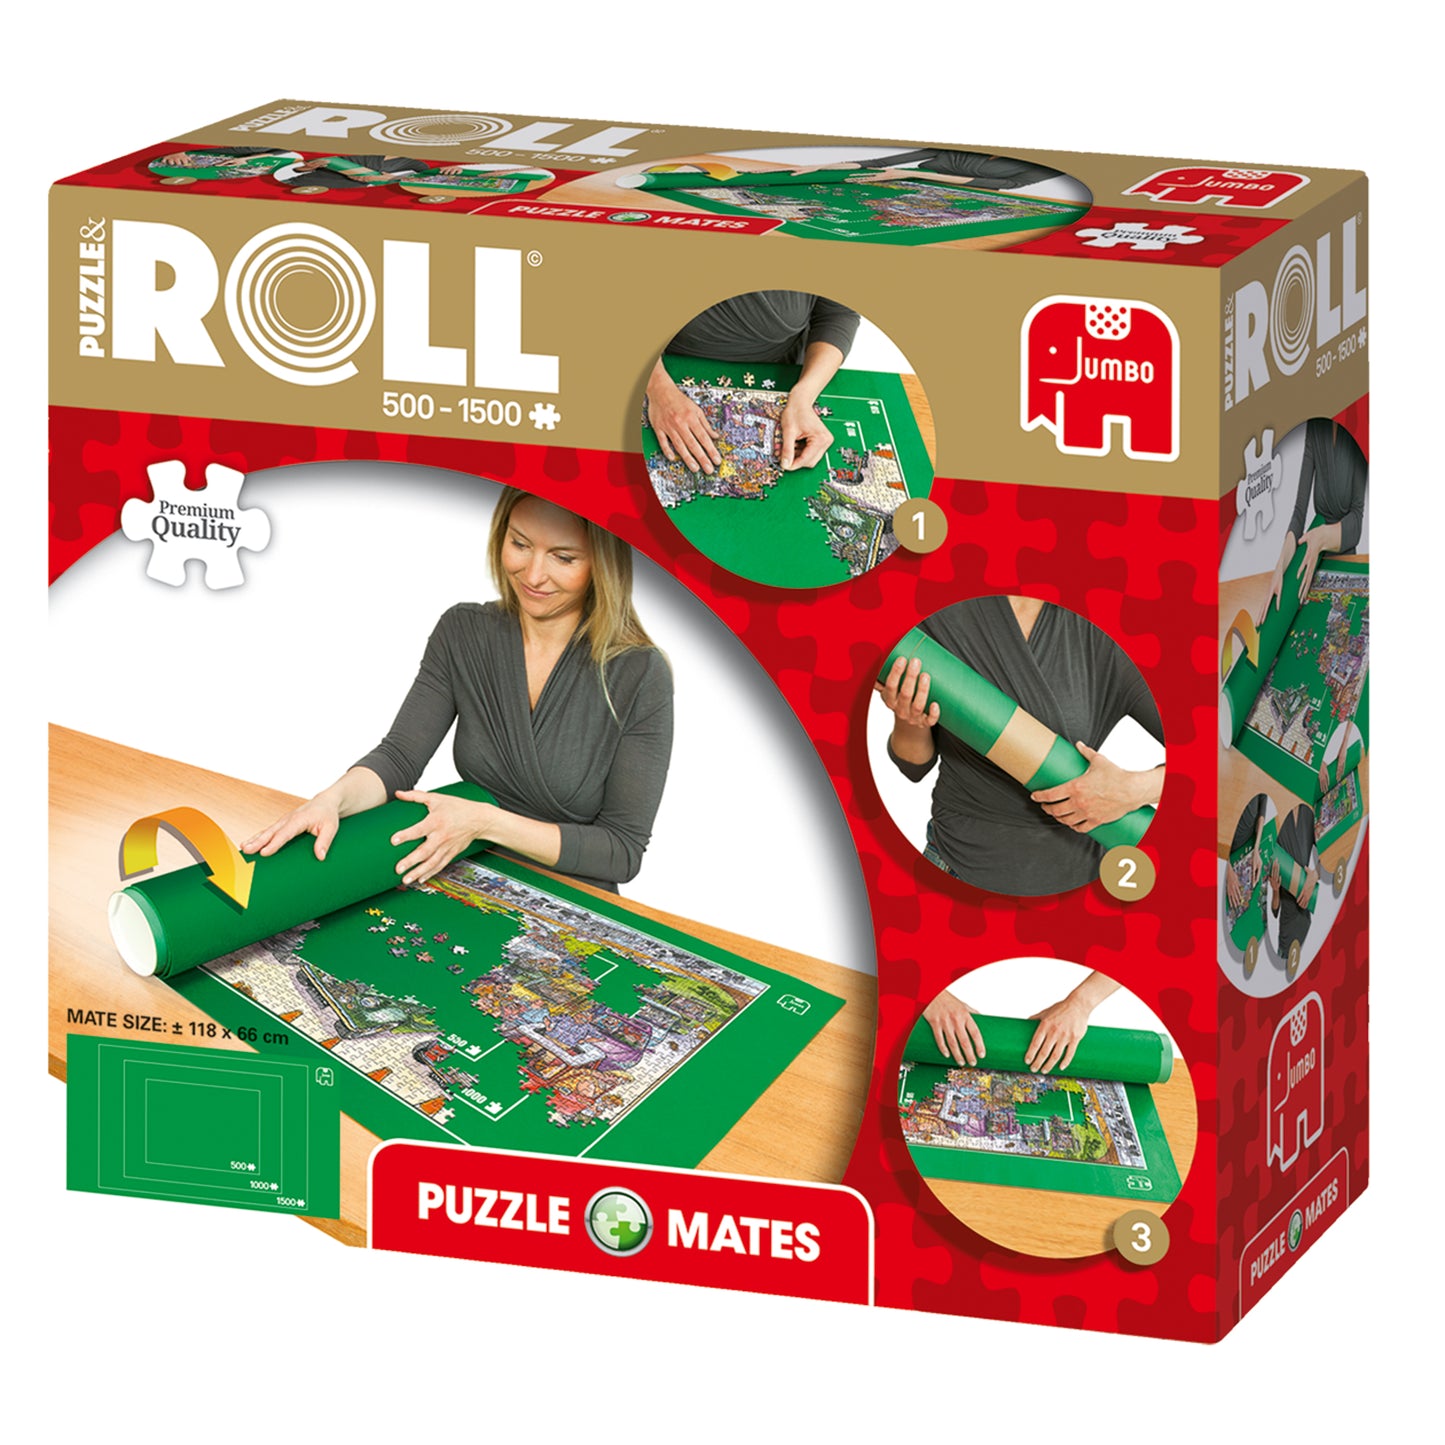 Puzzle Mates - Puzzle & Roll (up to 1500 piece puzzles) - product image - Jumboplay.com